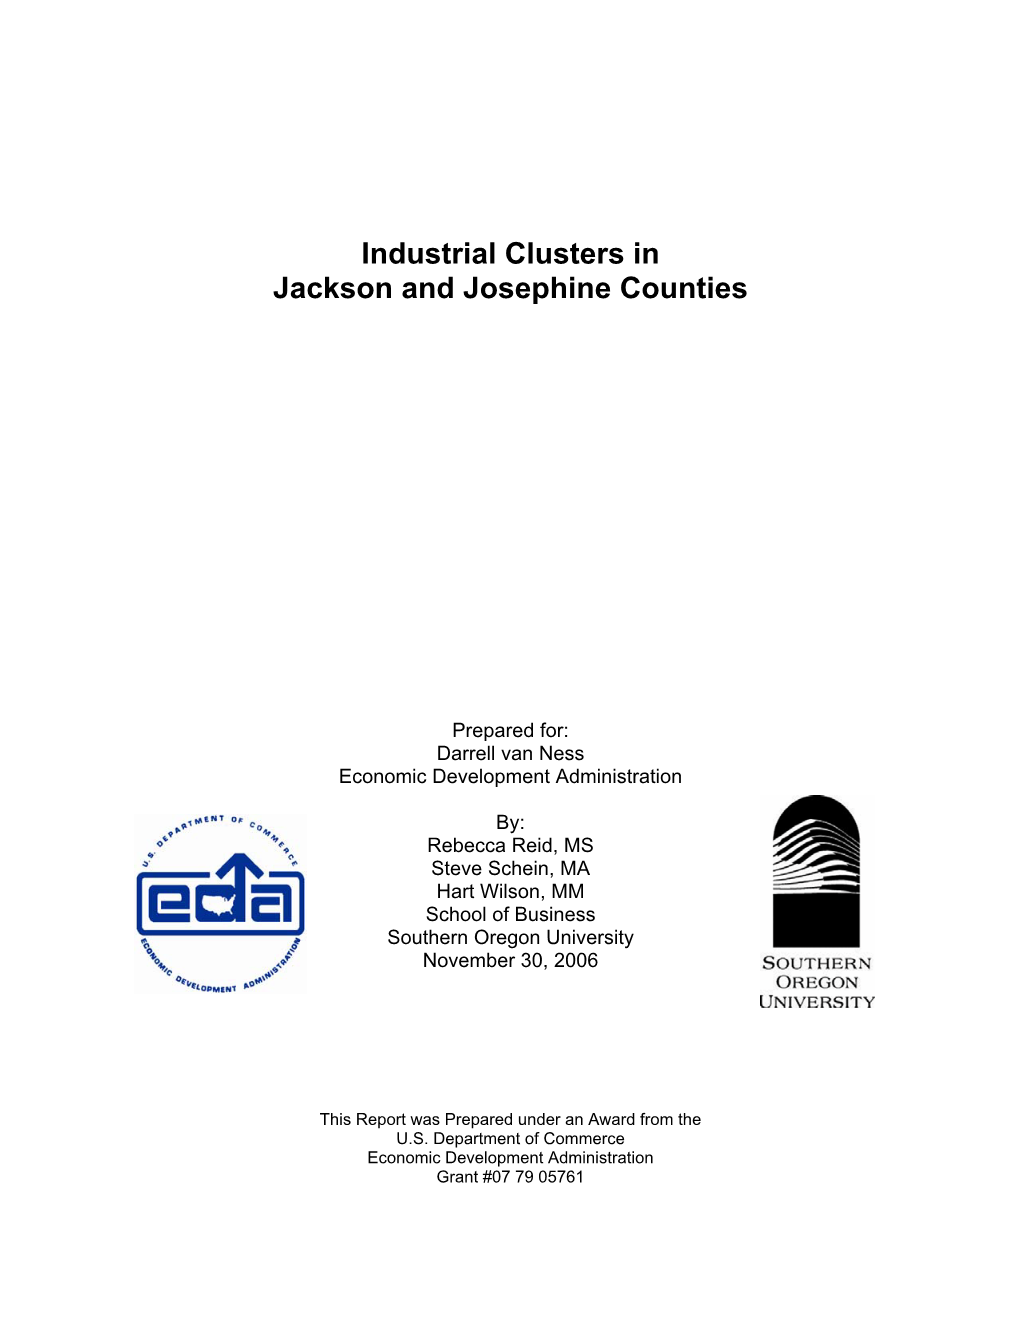 Business Cluster Analysis of Jackson and Josephine Counties